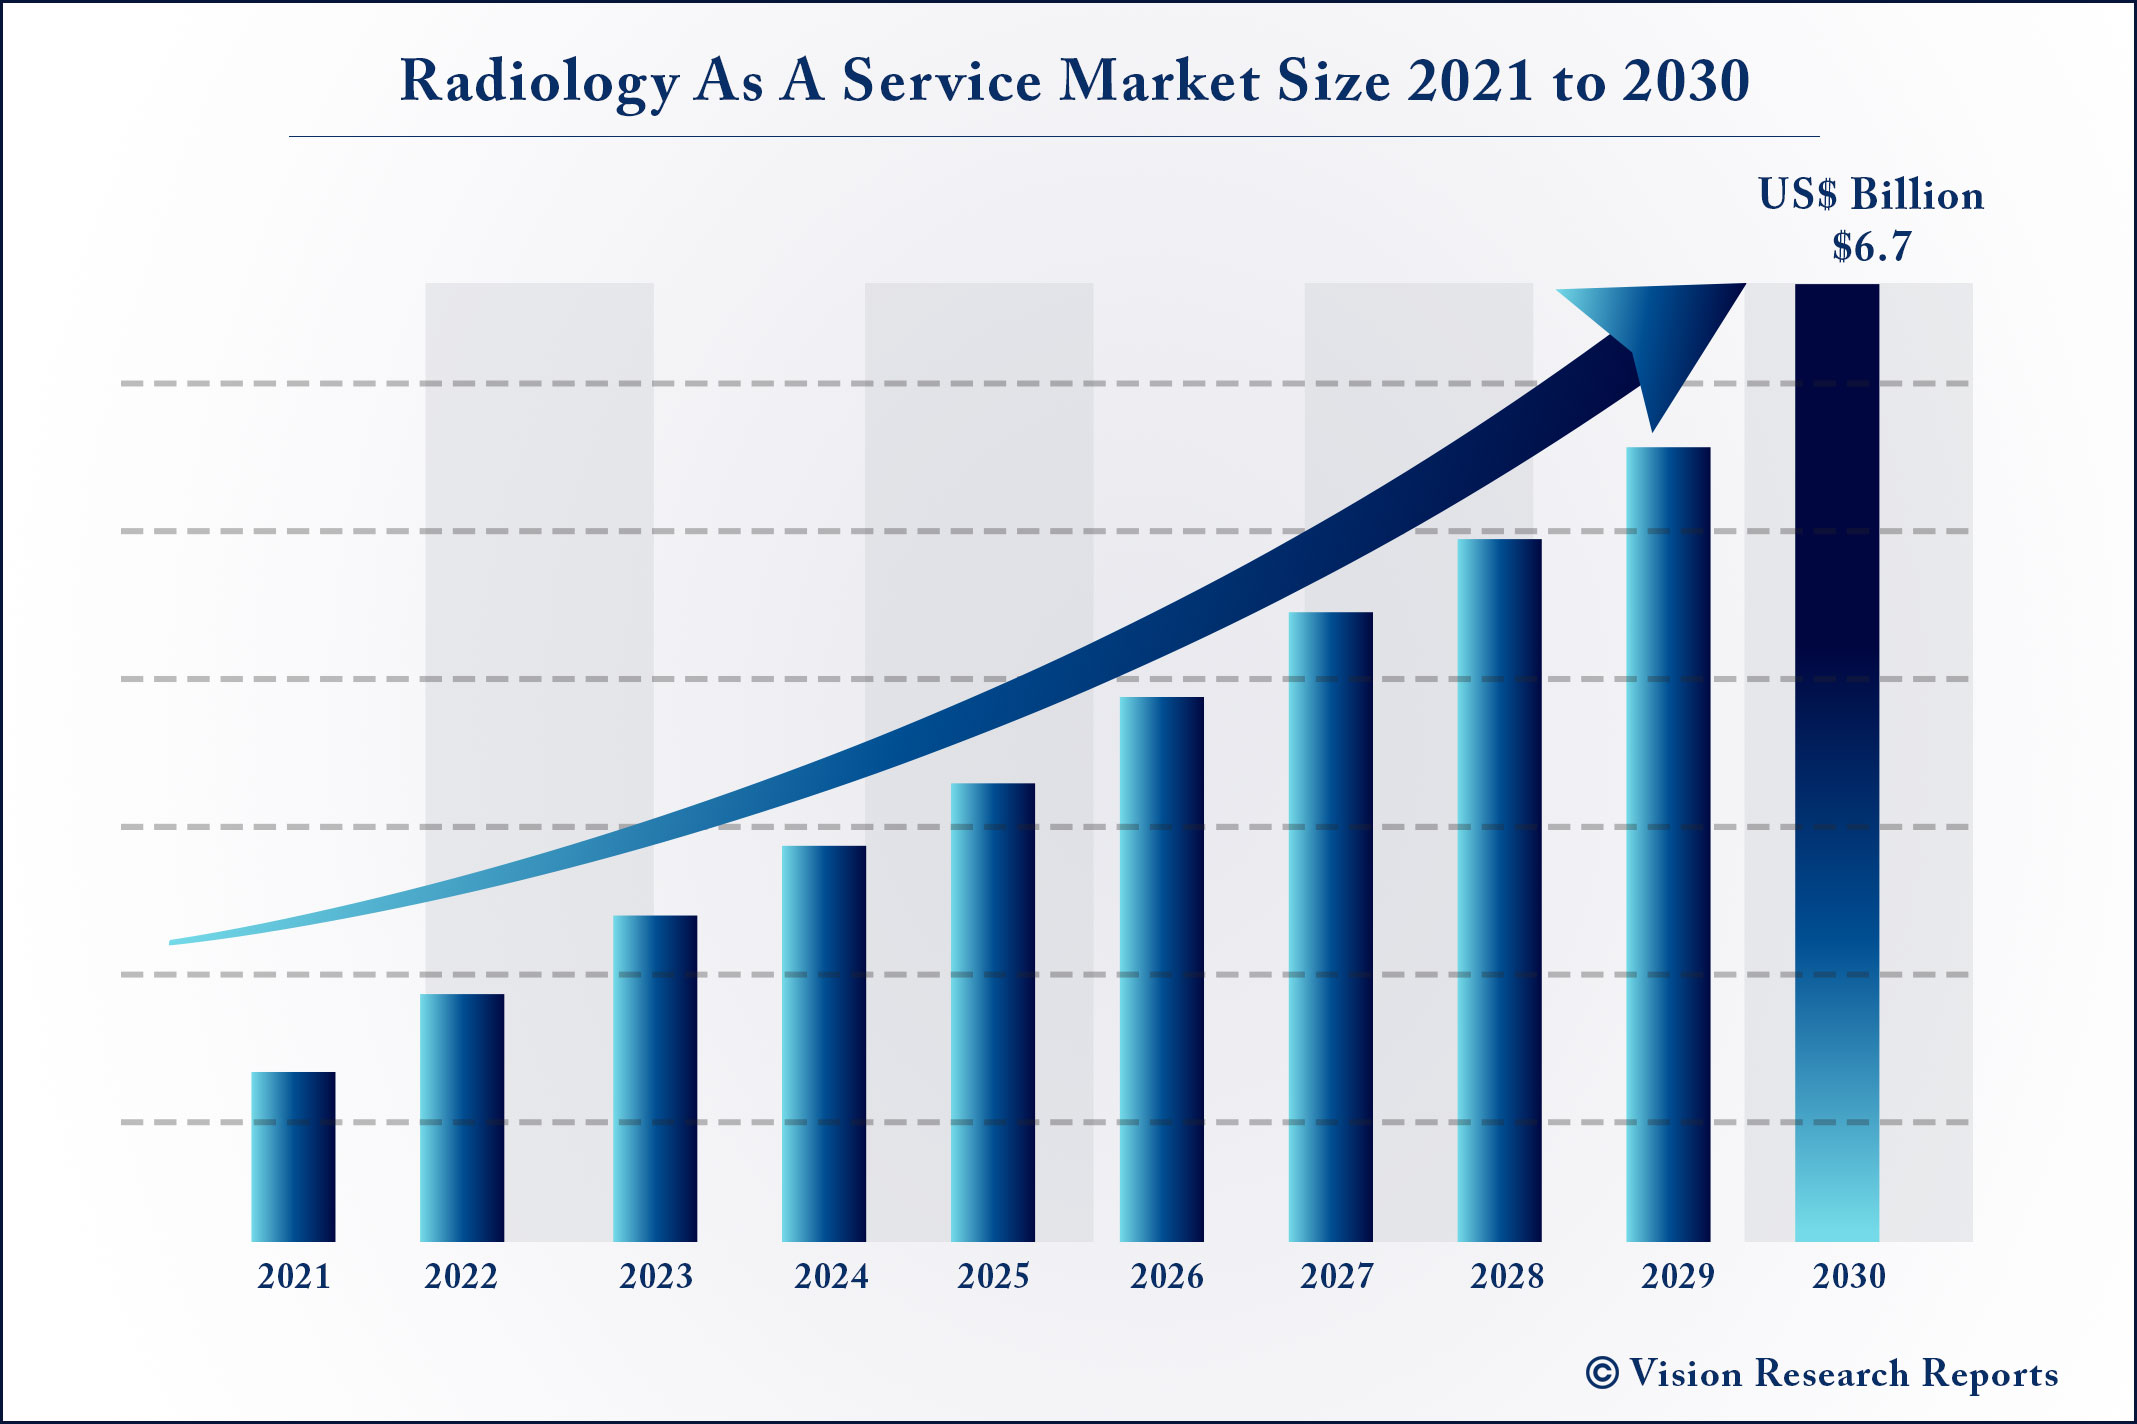 Radiology As A Service Market Size 2021 to 2030